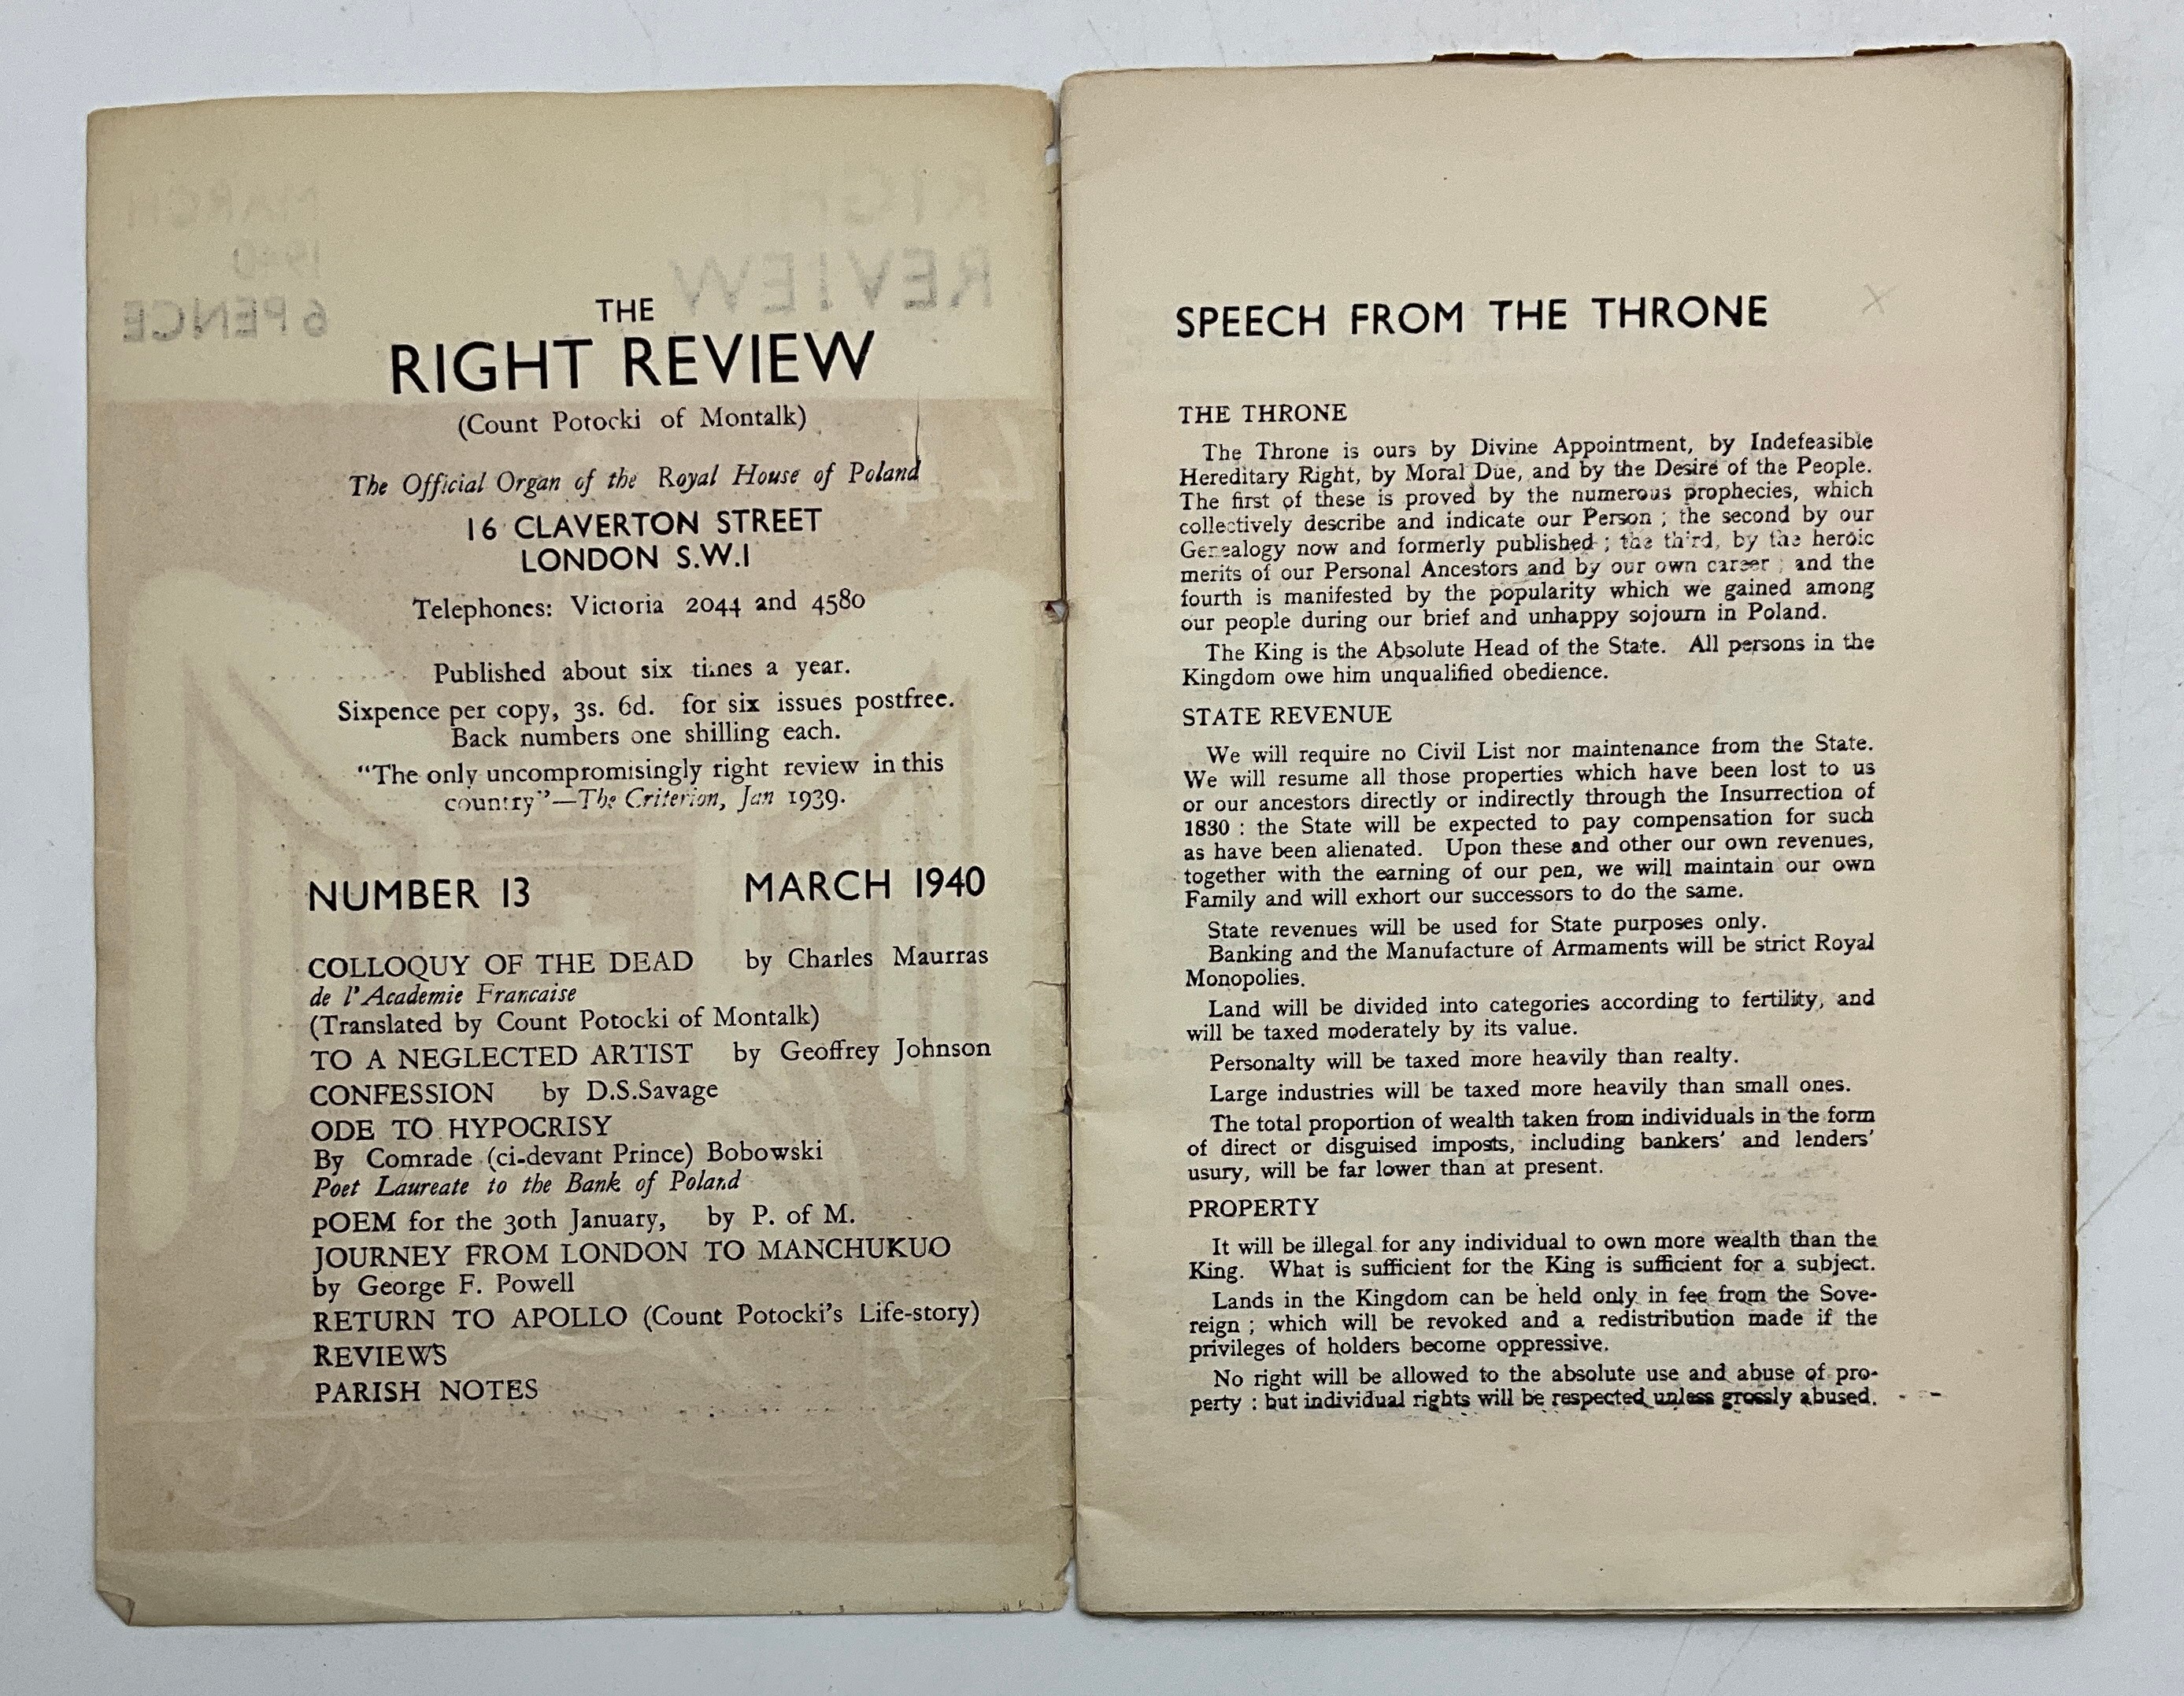 THE RIGHT REVIEW - MARCH 1940 - Image 2 of 5